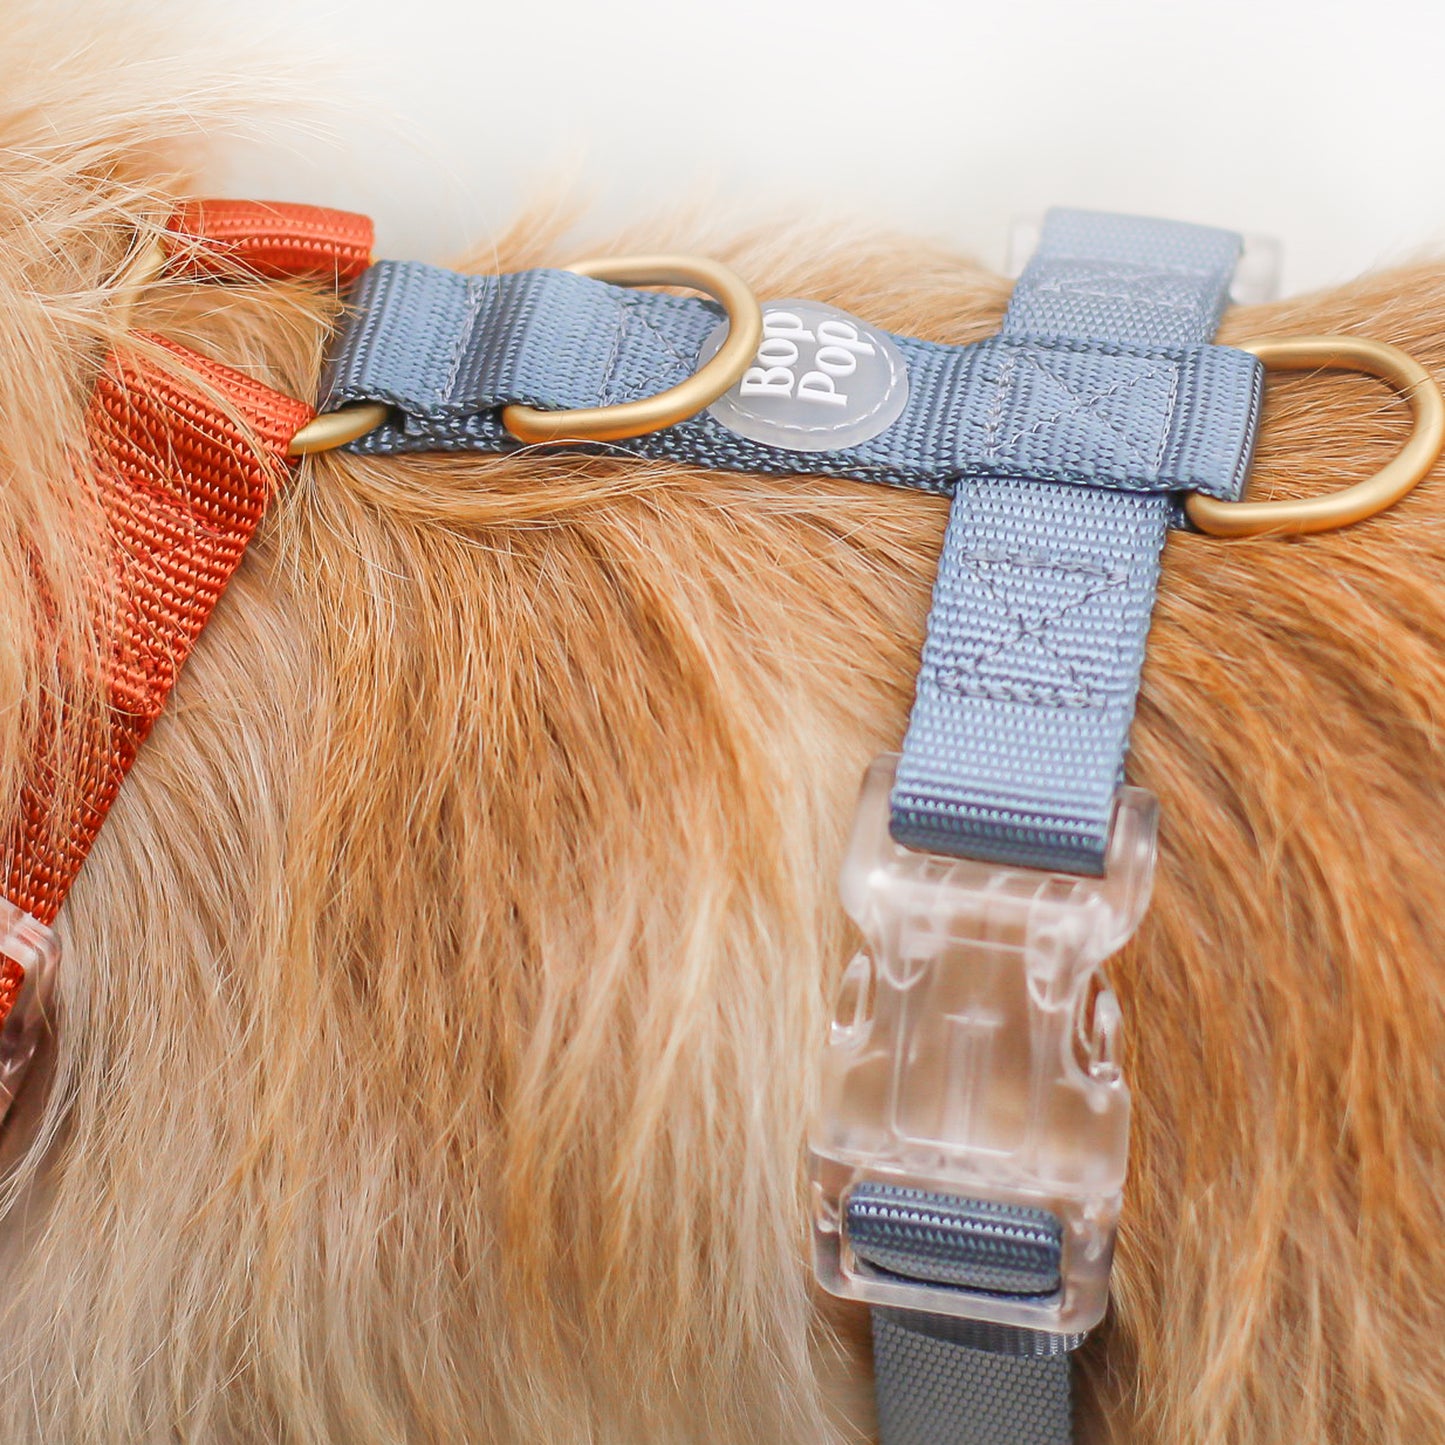 2 Color Dual Contrast Sienna Orange Rust Slate Dusty Grey Blue Classic Dog Nylon Strap Harness  with Gold Hardware Clear Buckles Pet Accessory Bop Pop Pets Details Logo Tag 